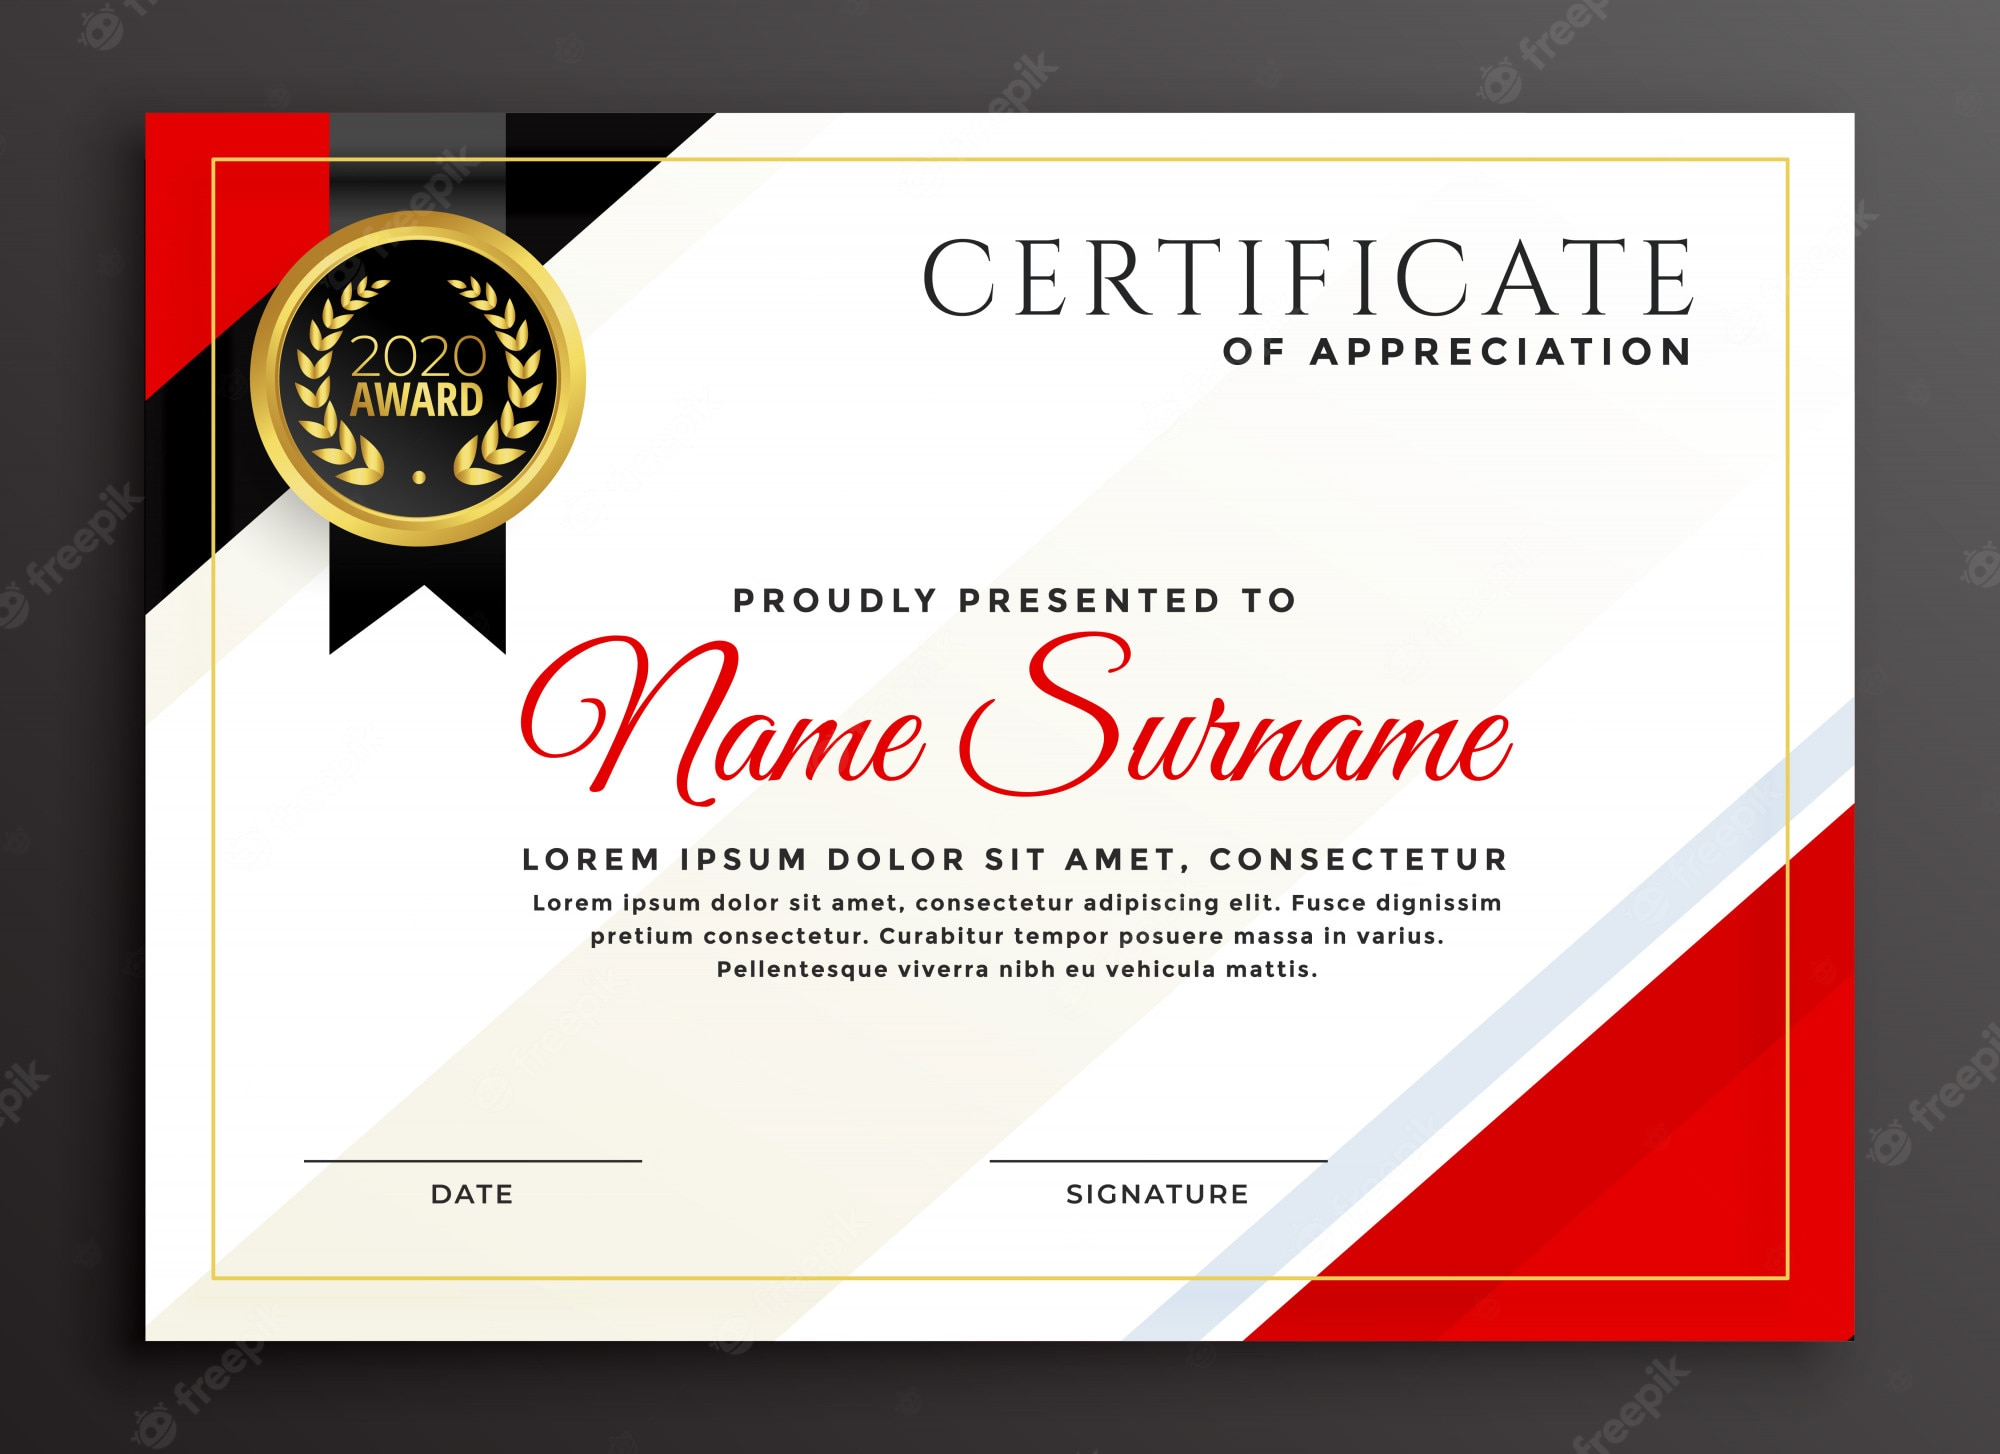 Certificate Images - Free Download on Freepik Throughout Participation Certificate Templates Free Download